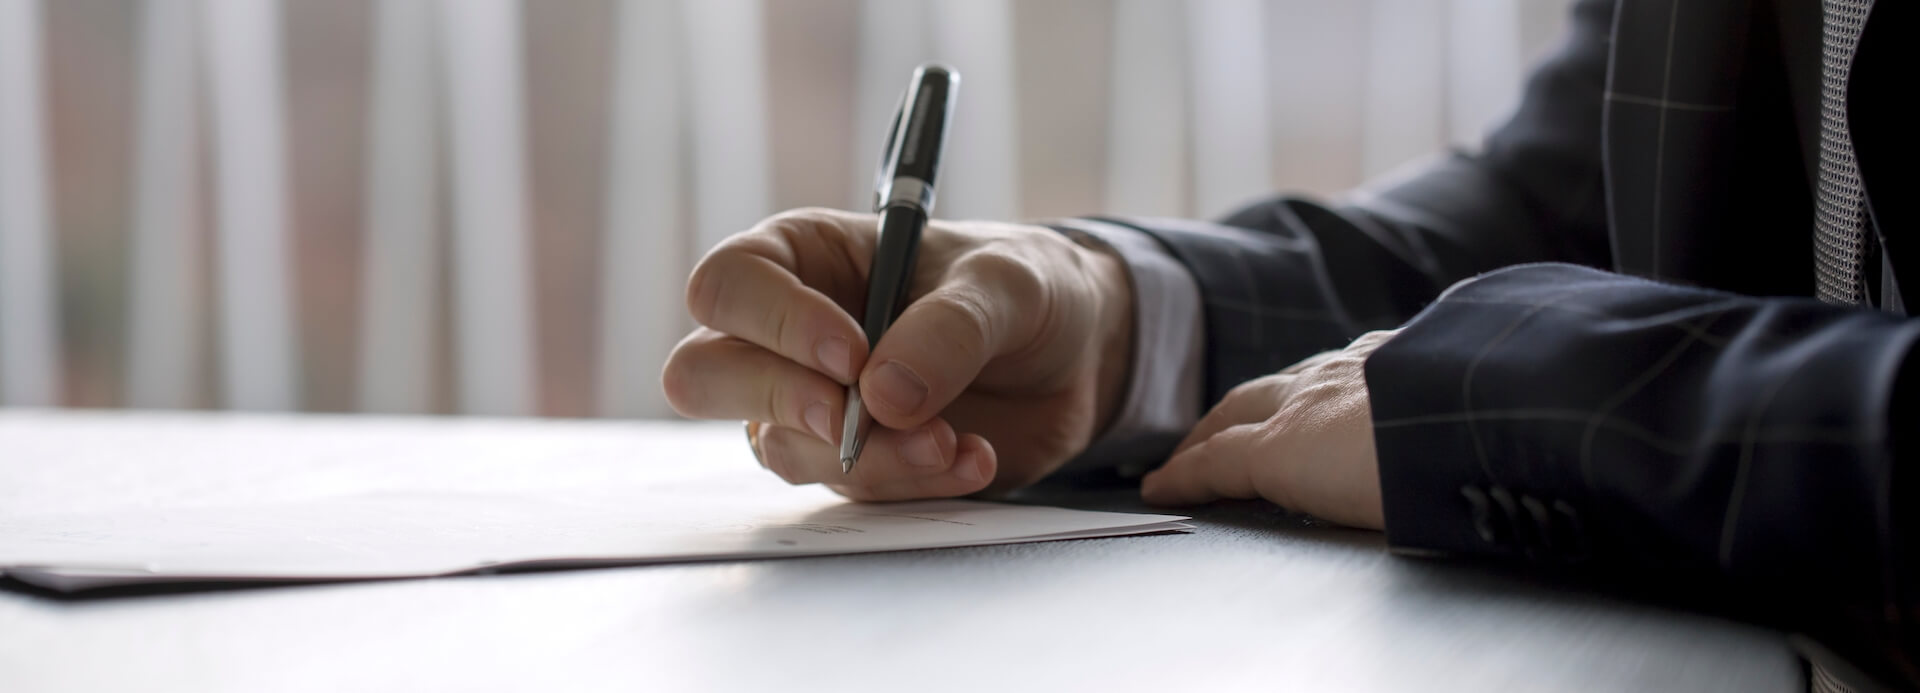 Lawyer Signing Document on a Desk